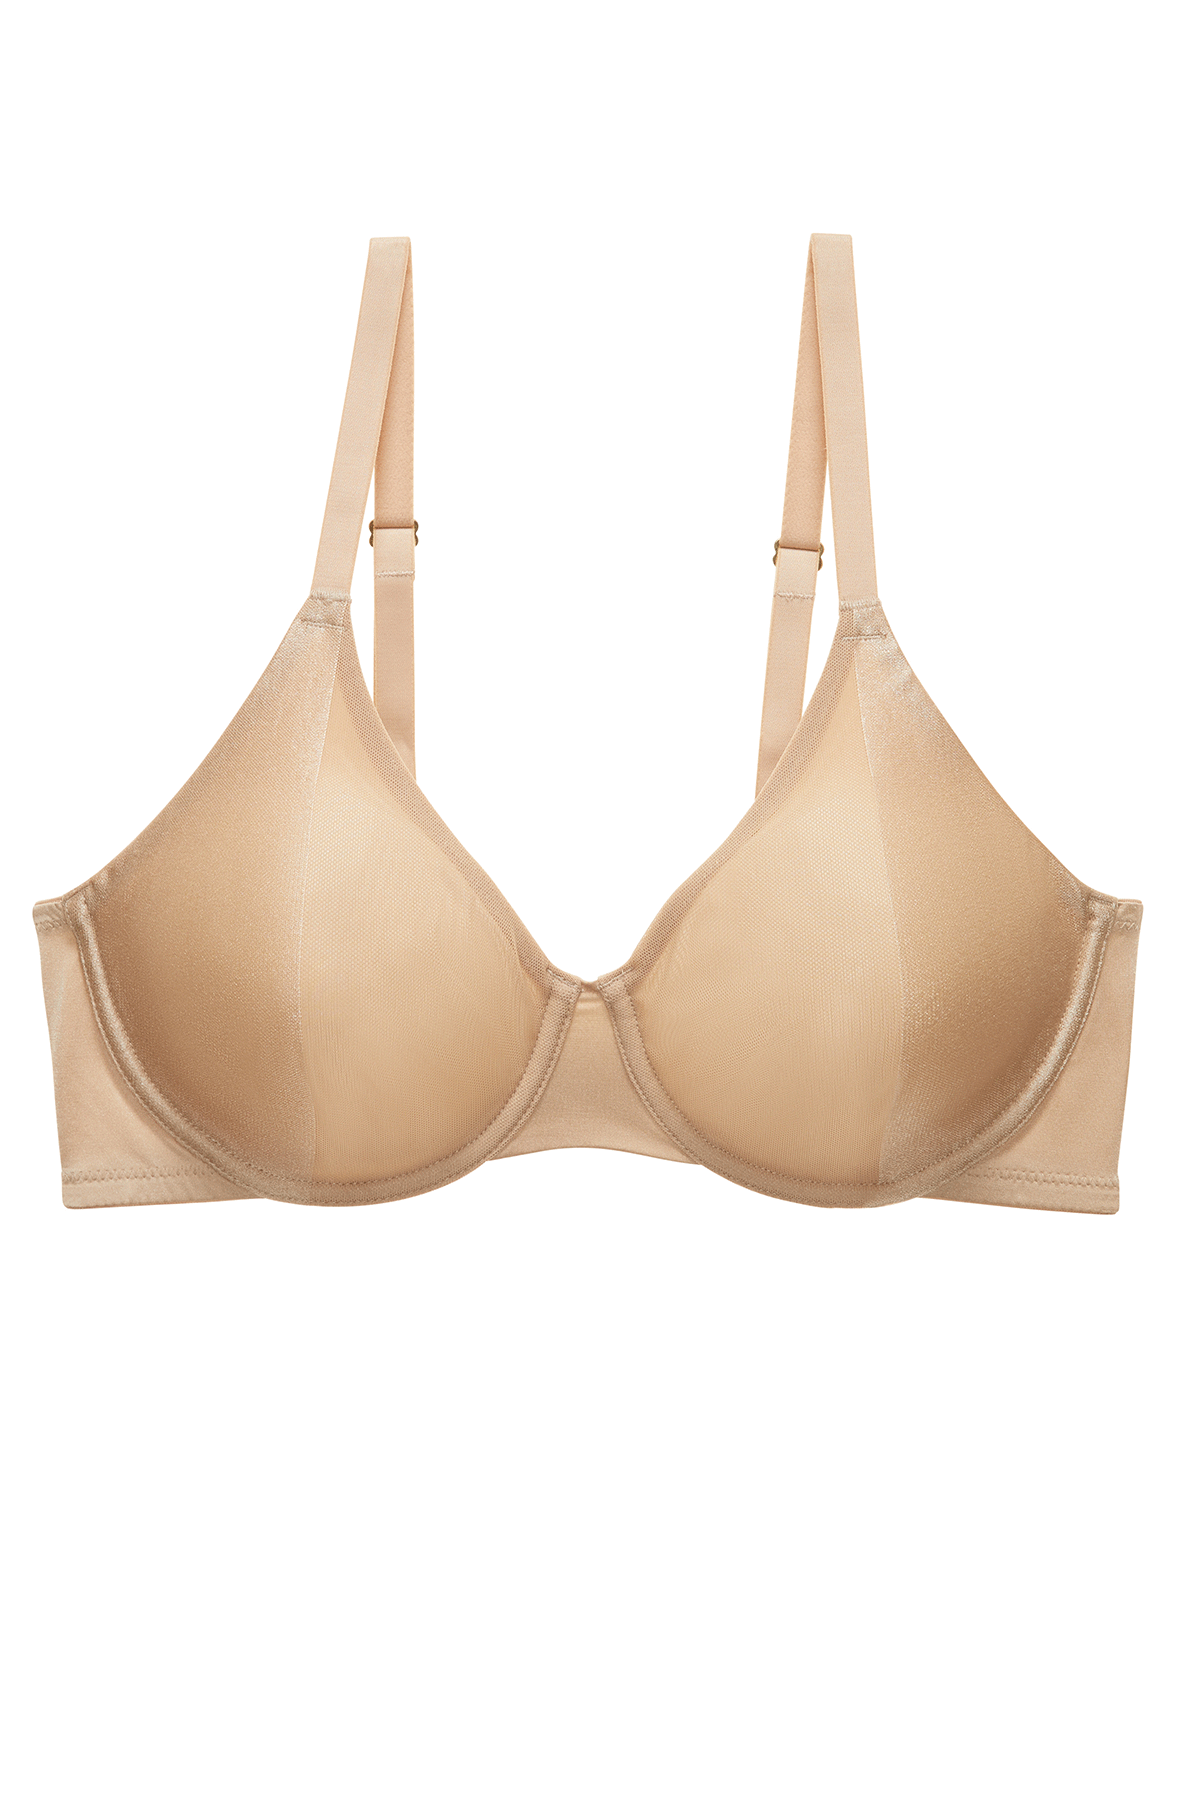 Shop Unlined Underwire Bras - The Base Unlined